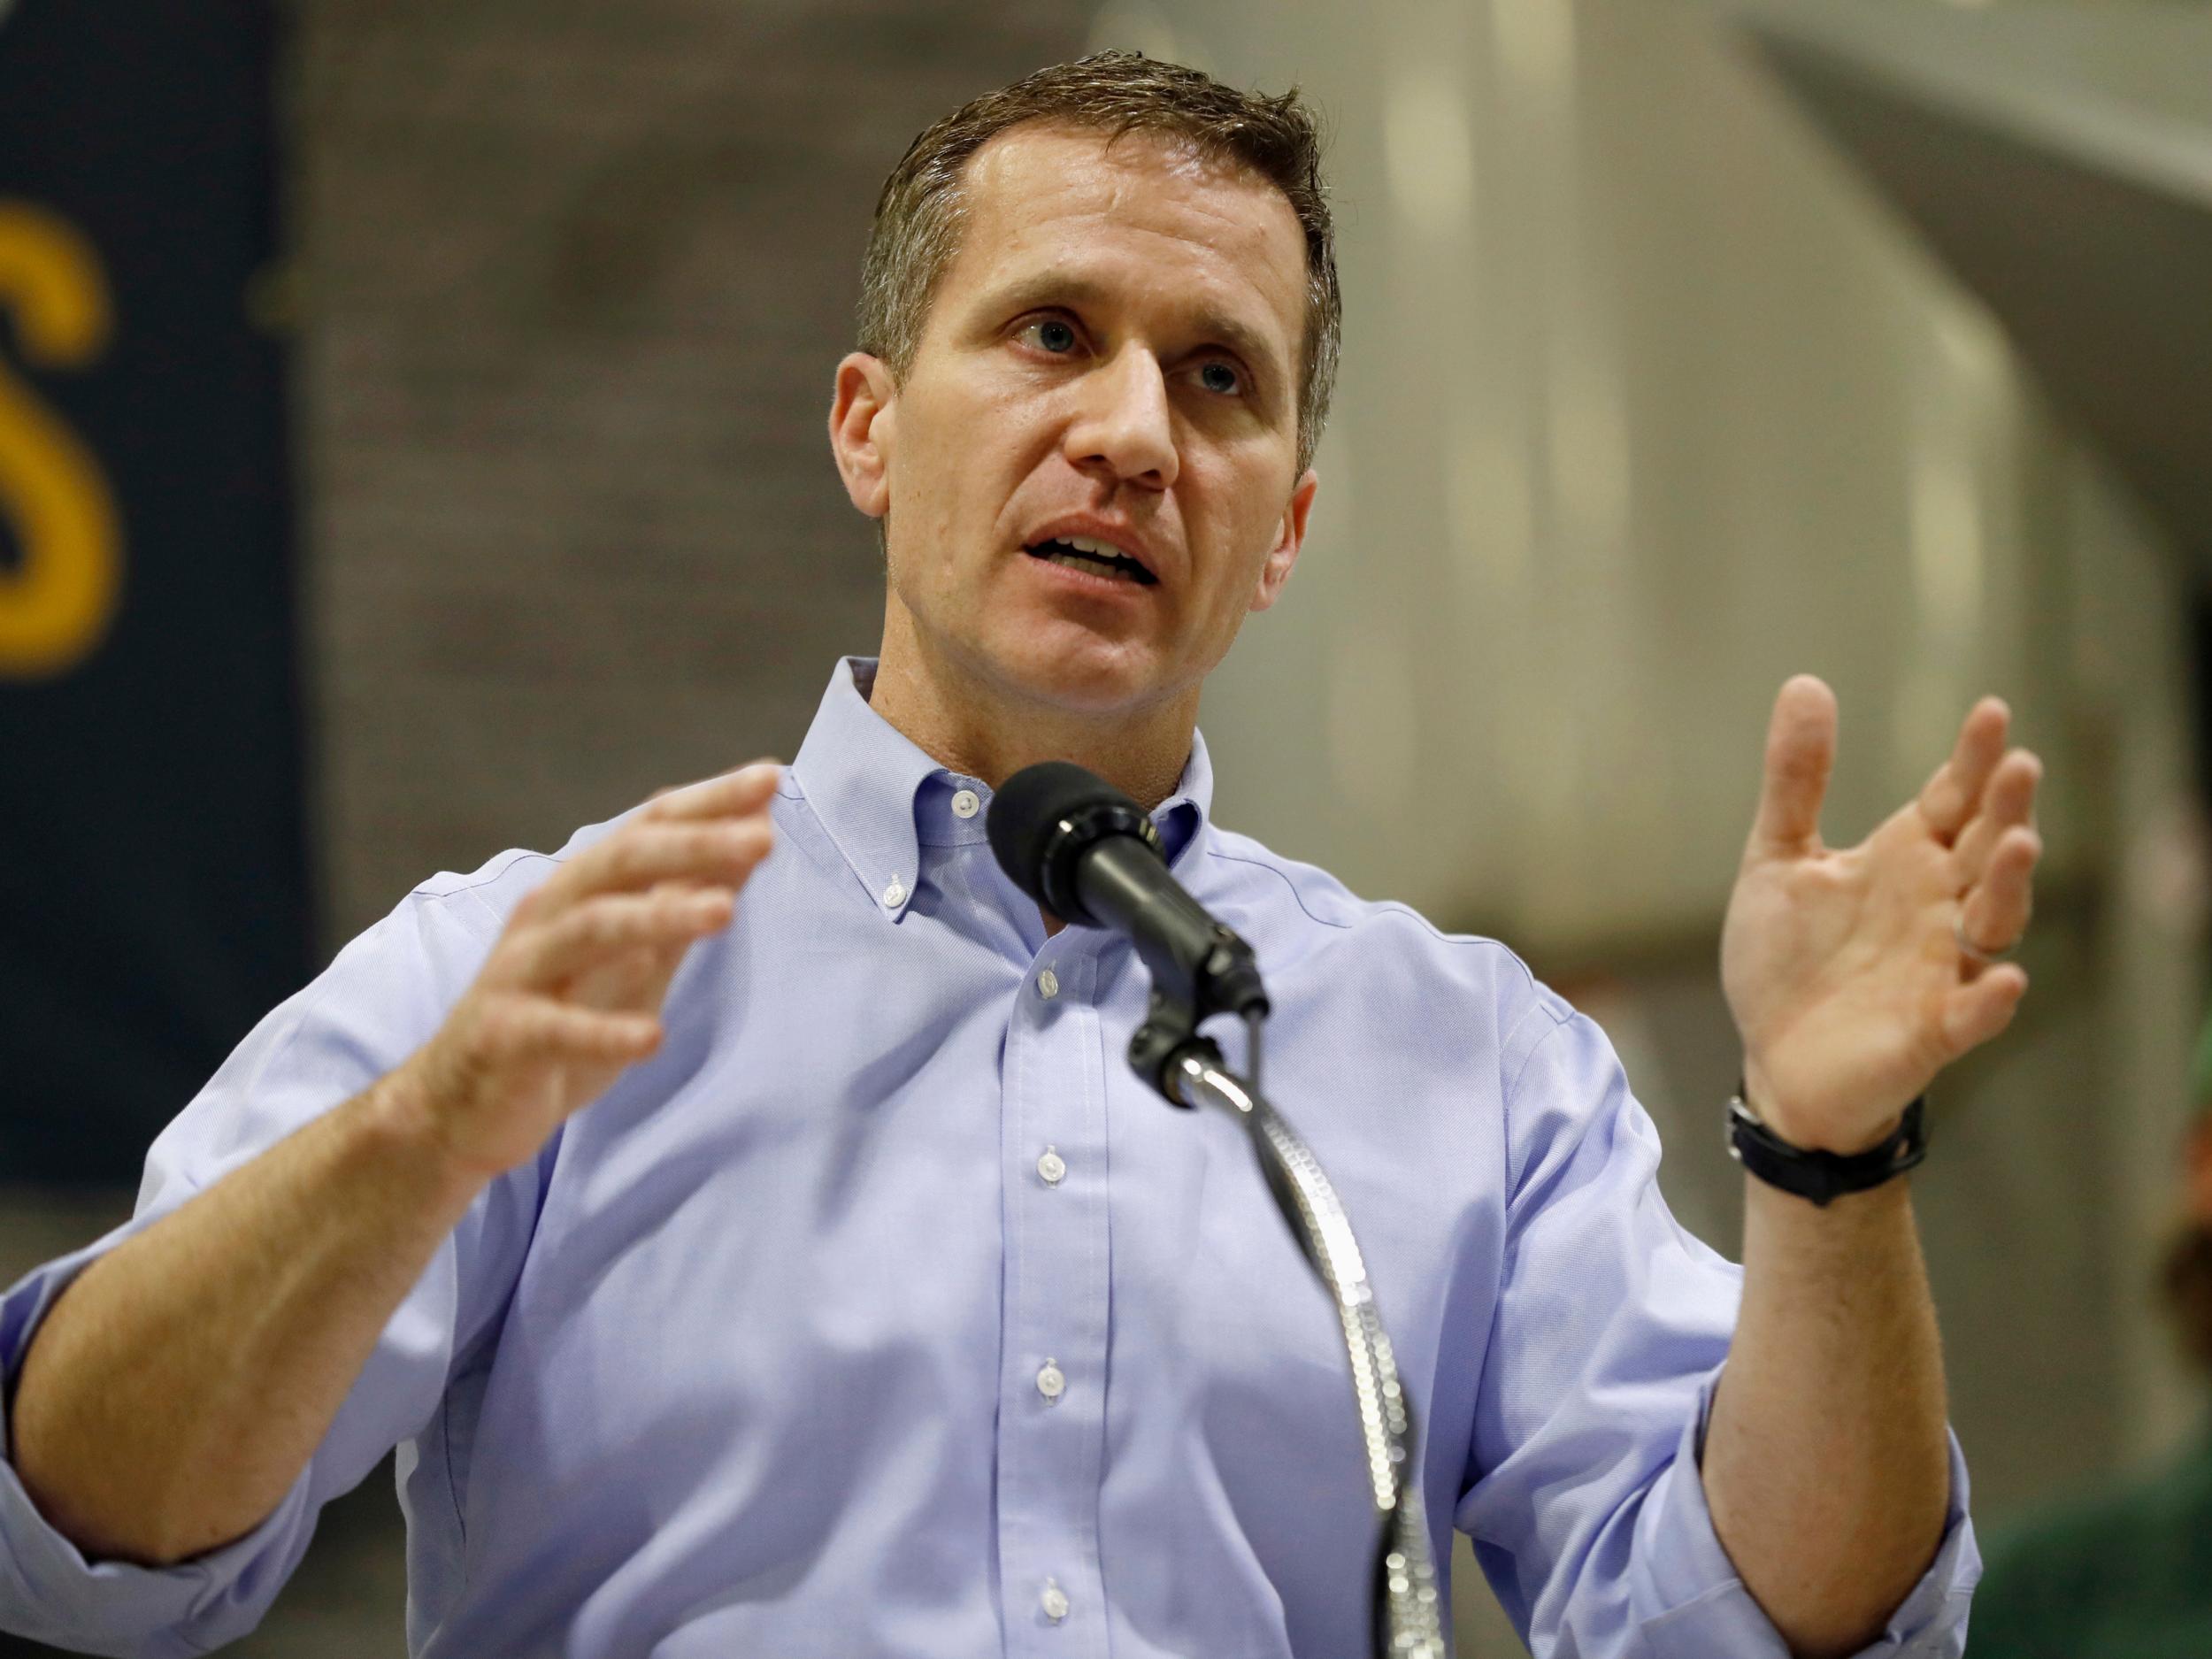 Missouri Gov. Eric Greitens is accused of stealing a donor list from a charity he ran